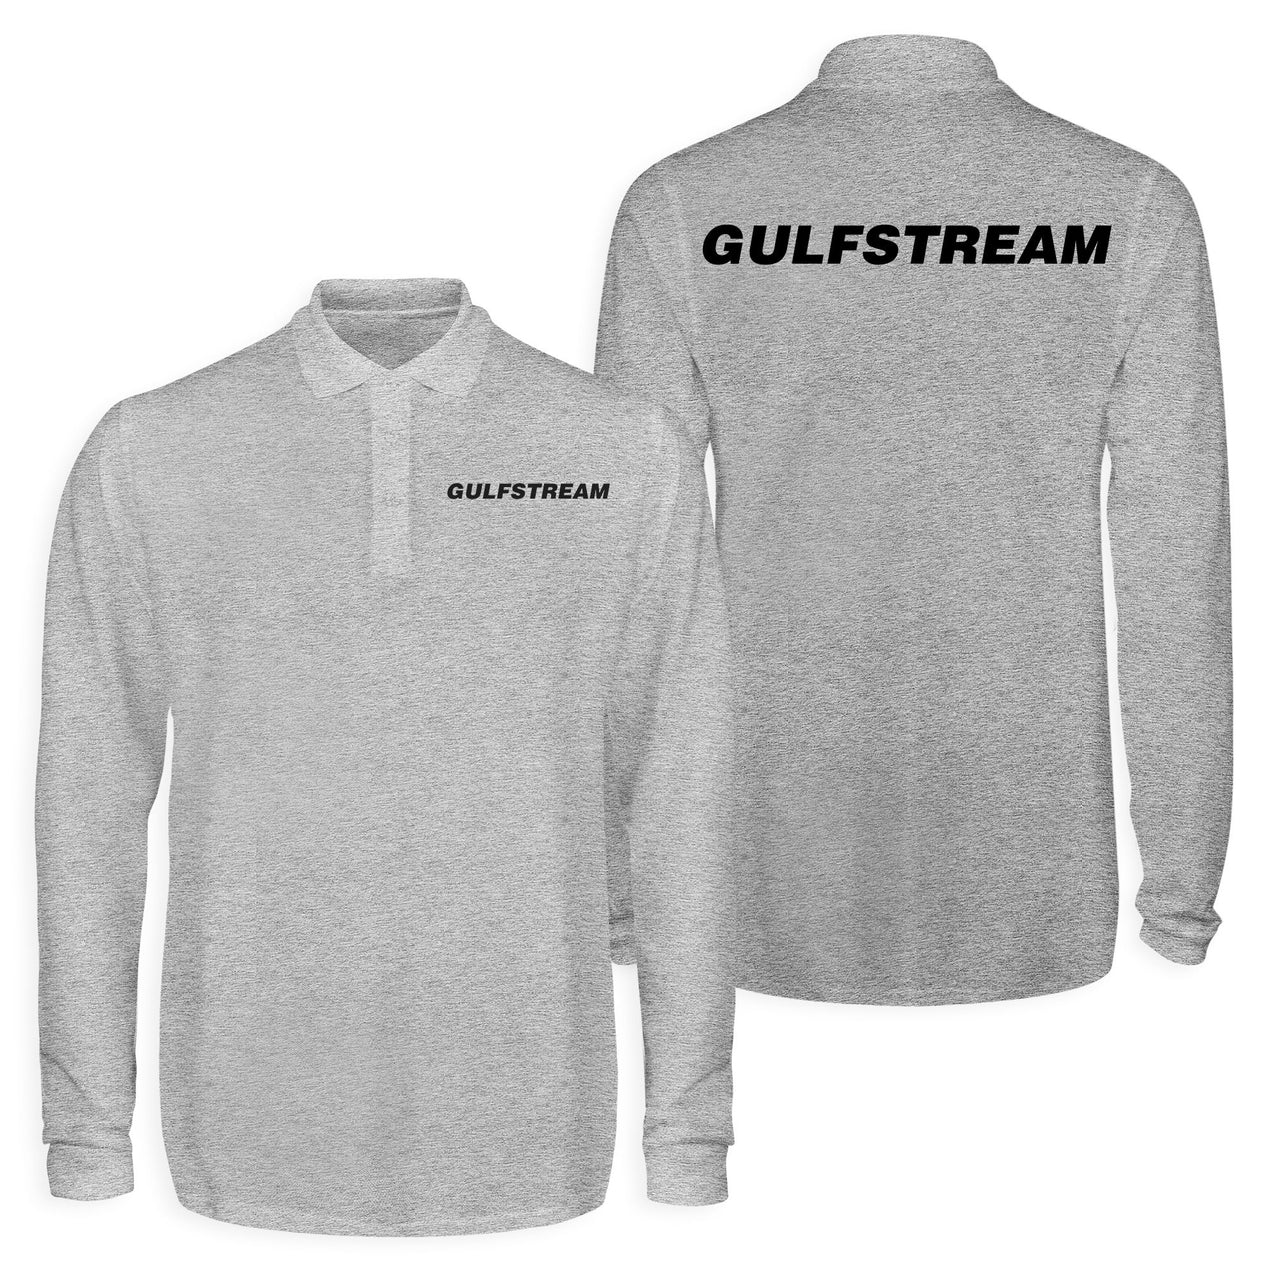 Gulfstream & Text Designed Long Sleeve Polo T-Shirts (Double-Side)